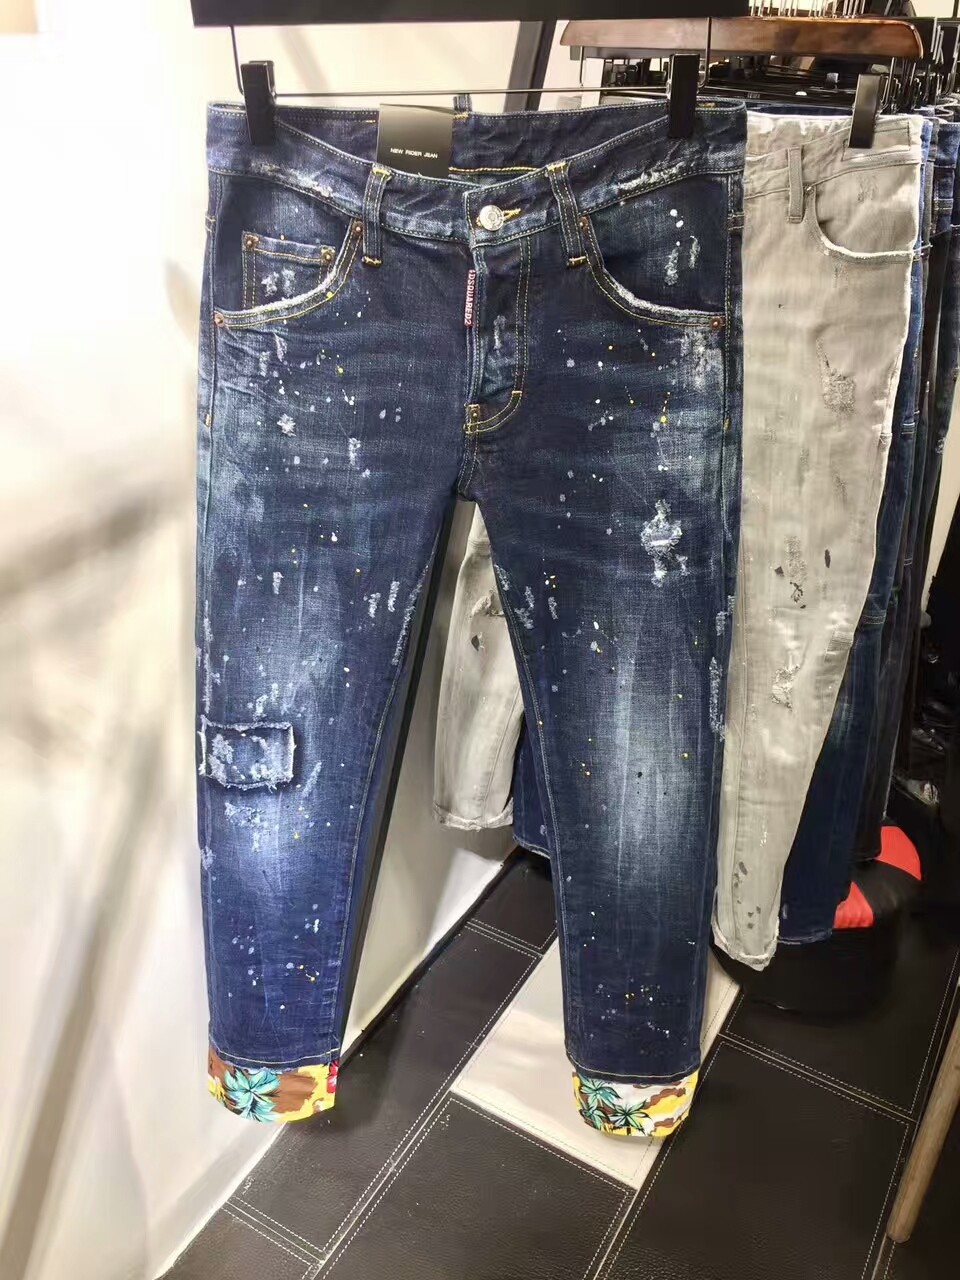 dsquared2 jeans yupoo